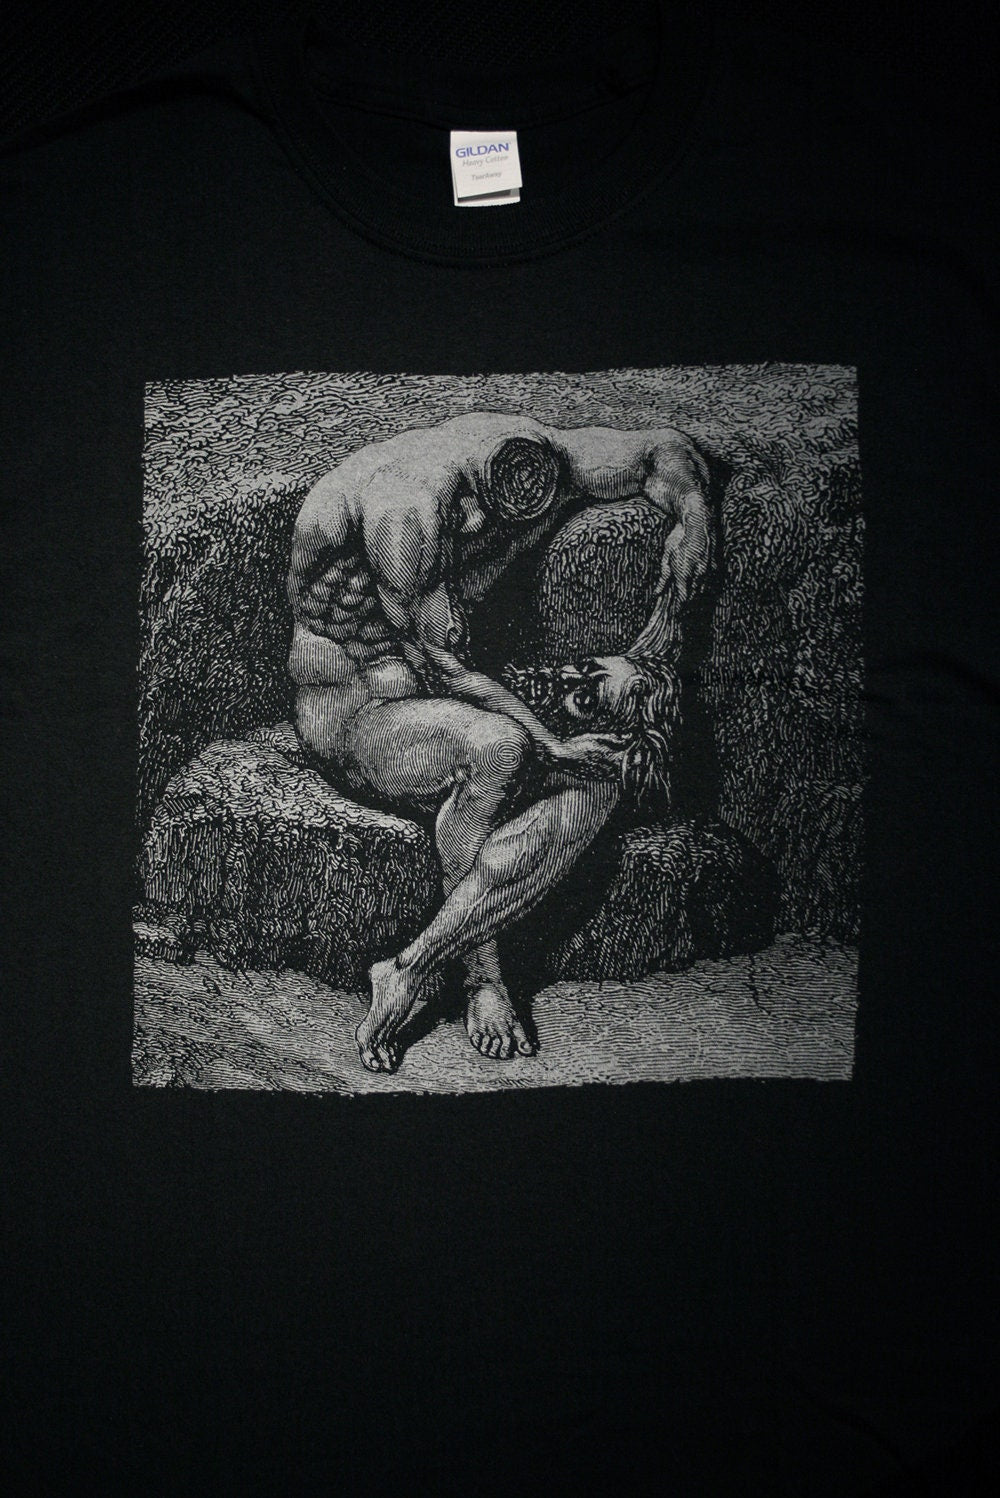 Headless man with his own head in lap, Geri Del Bello, Gustave Dore illustration - T-shirt female fitted